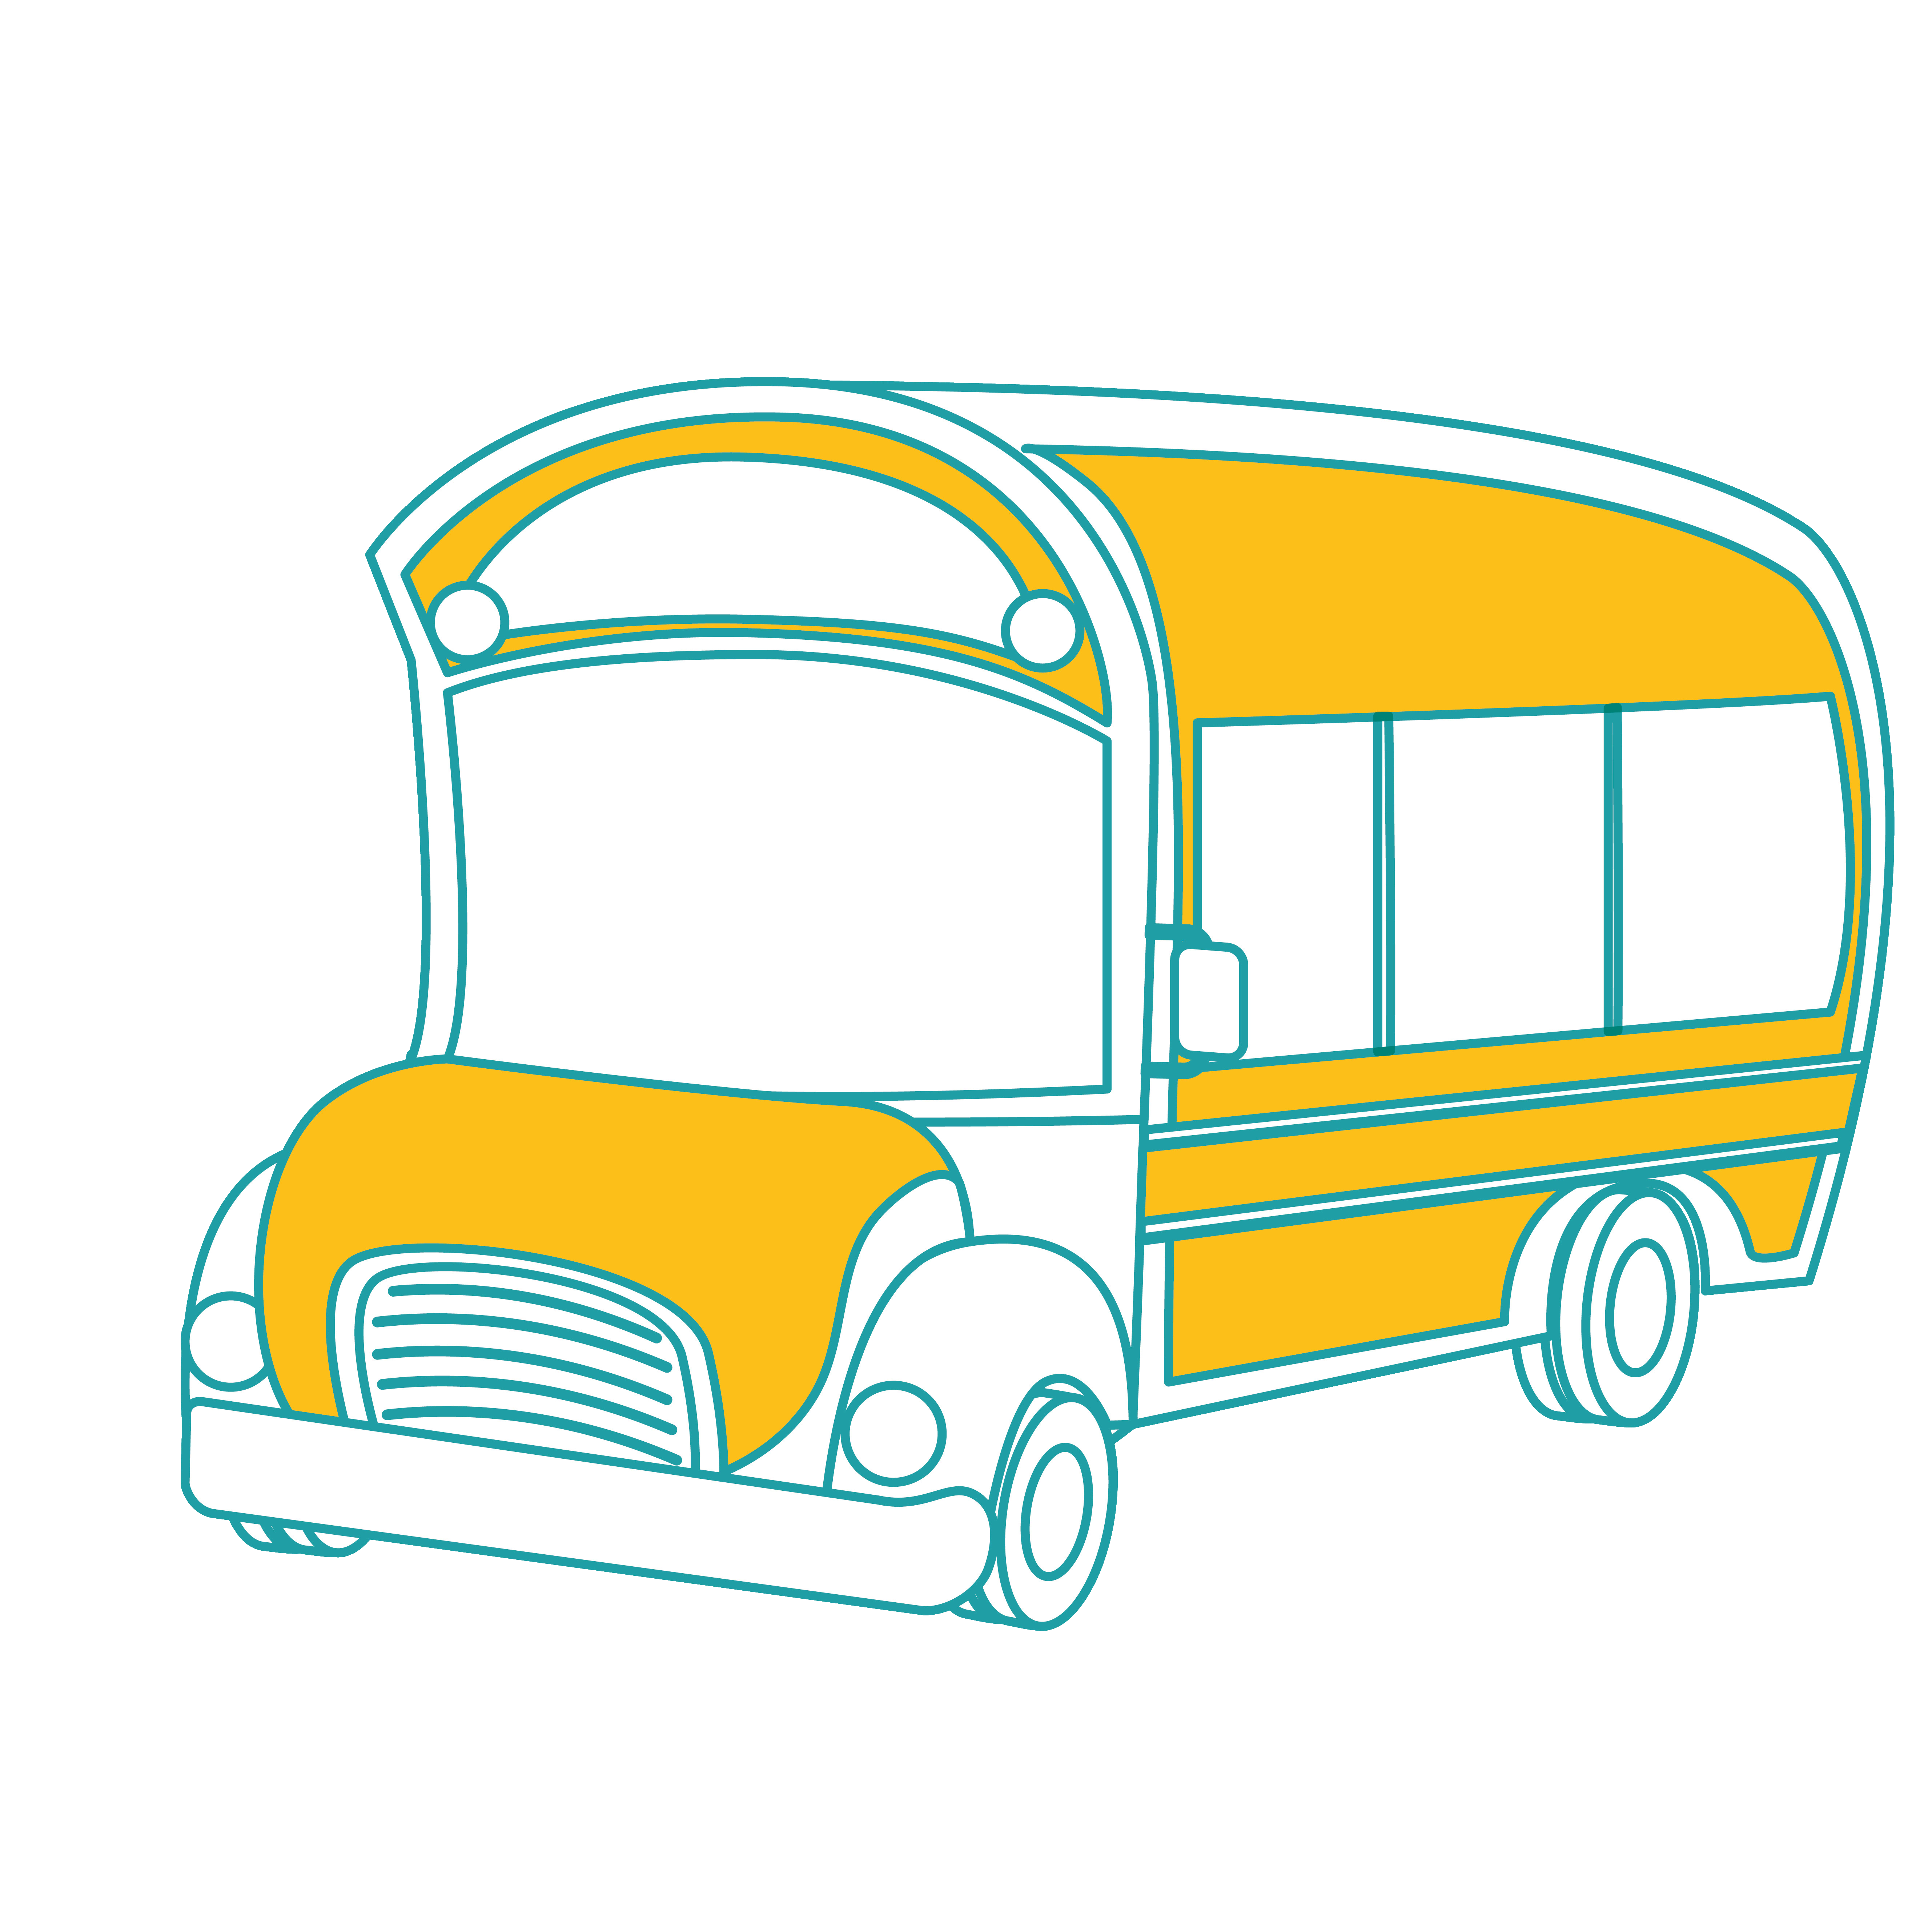 School bus of education learning and transportation theme Isolated design Vector illustration